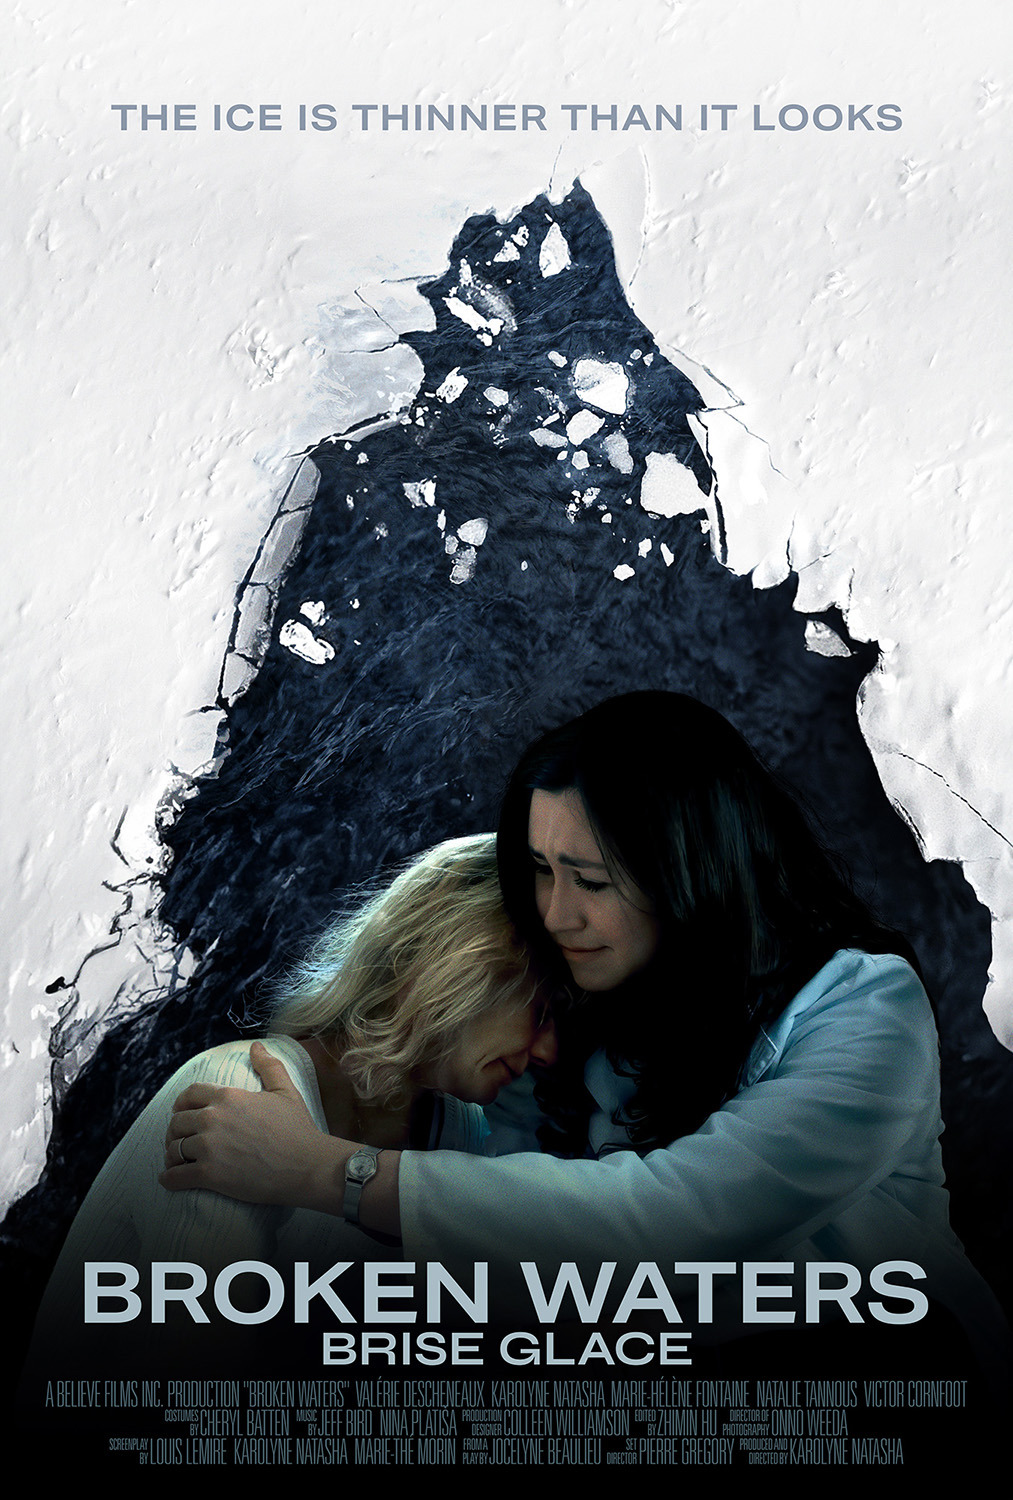 Extra Large Movie Poster Image for Brise glace / Broken Waters 